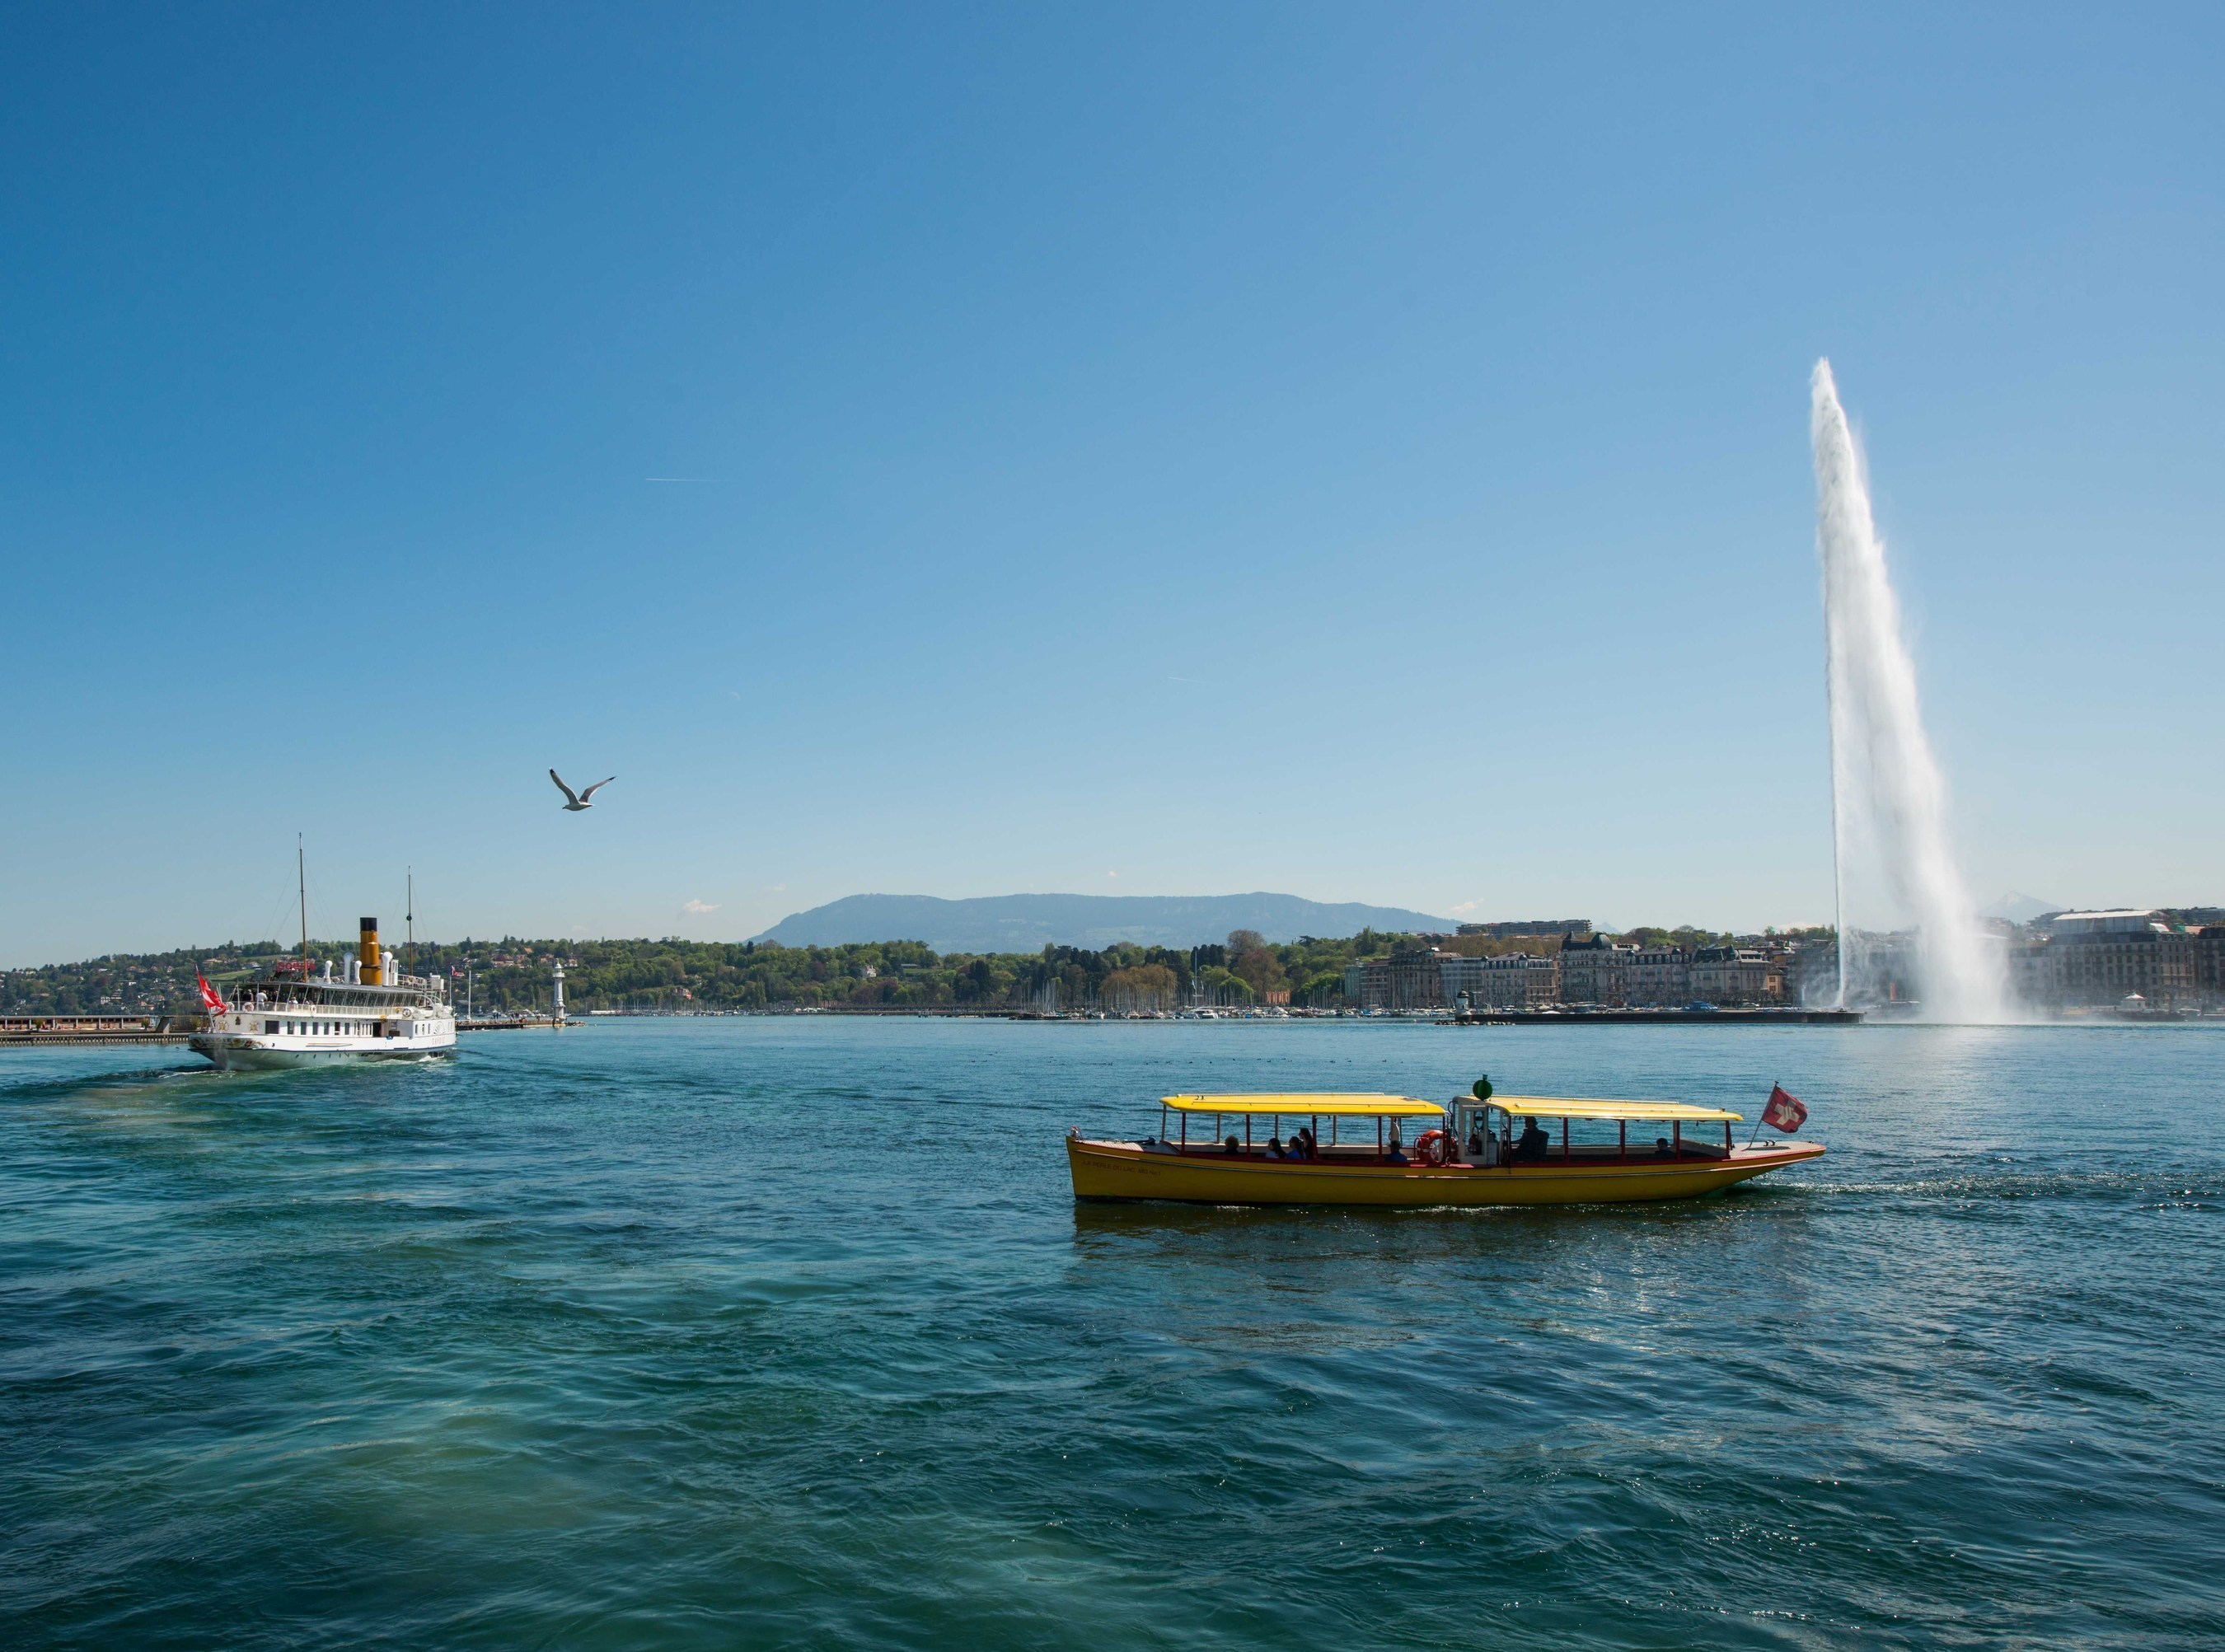 The famous Jet d'Eau, iconic landmark of Lake Geneva offering a peaceful panorama on the city